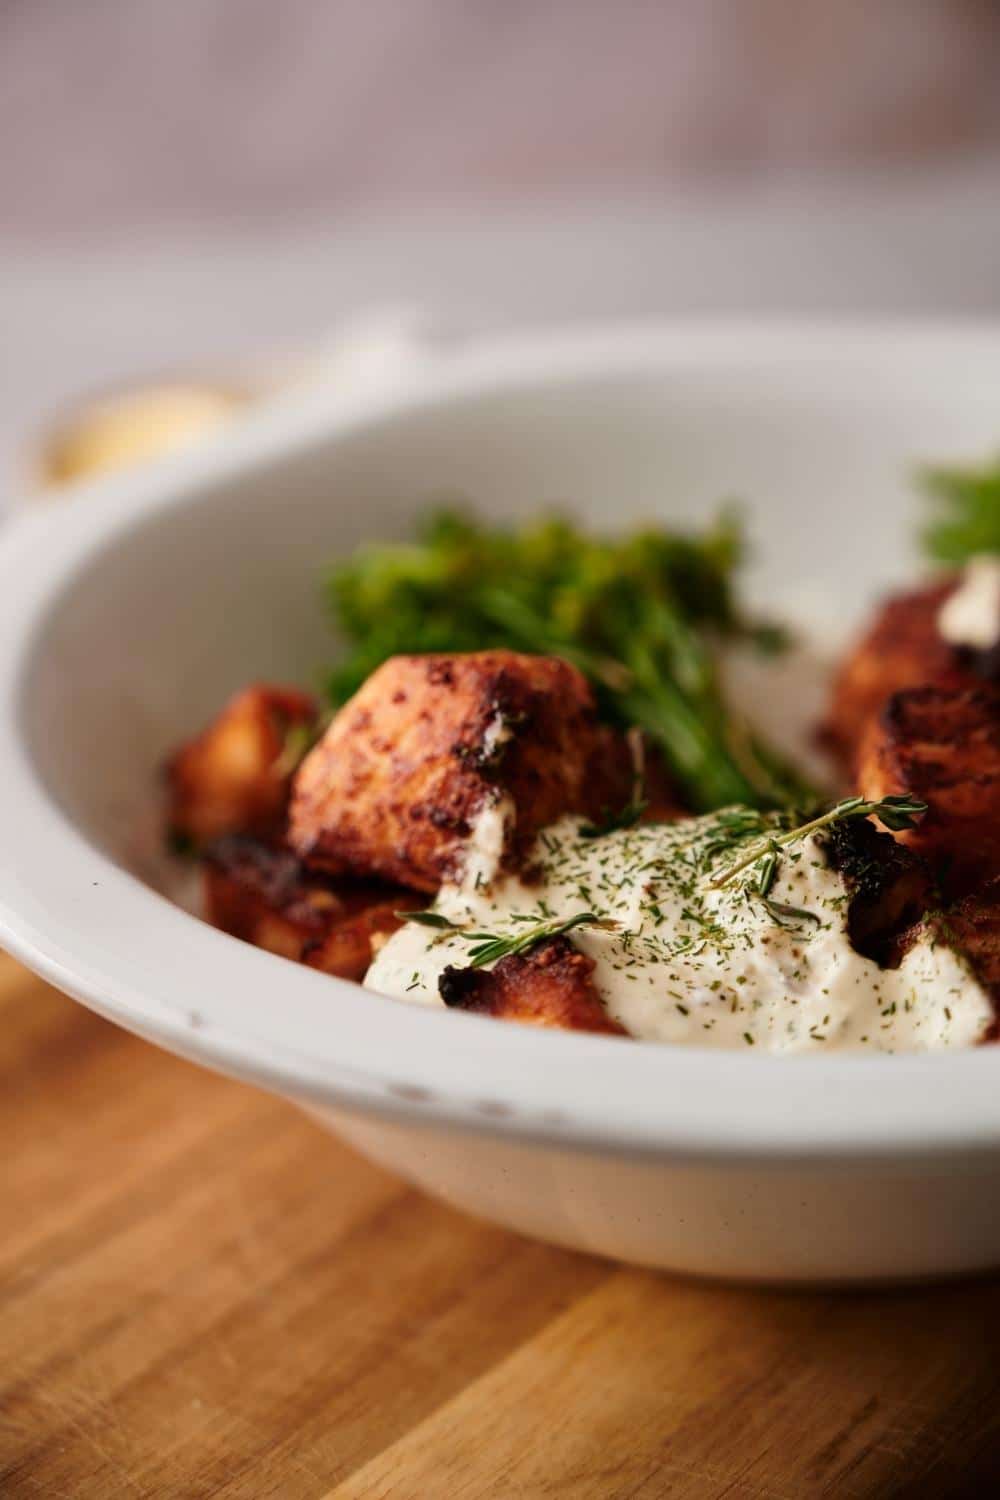 A close up of air fryer salmon bites served in a rice bowl. The salmon is topped with creamy dill sauce garnished with fresh chopped dill.